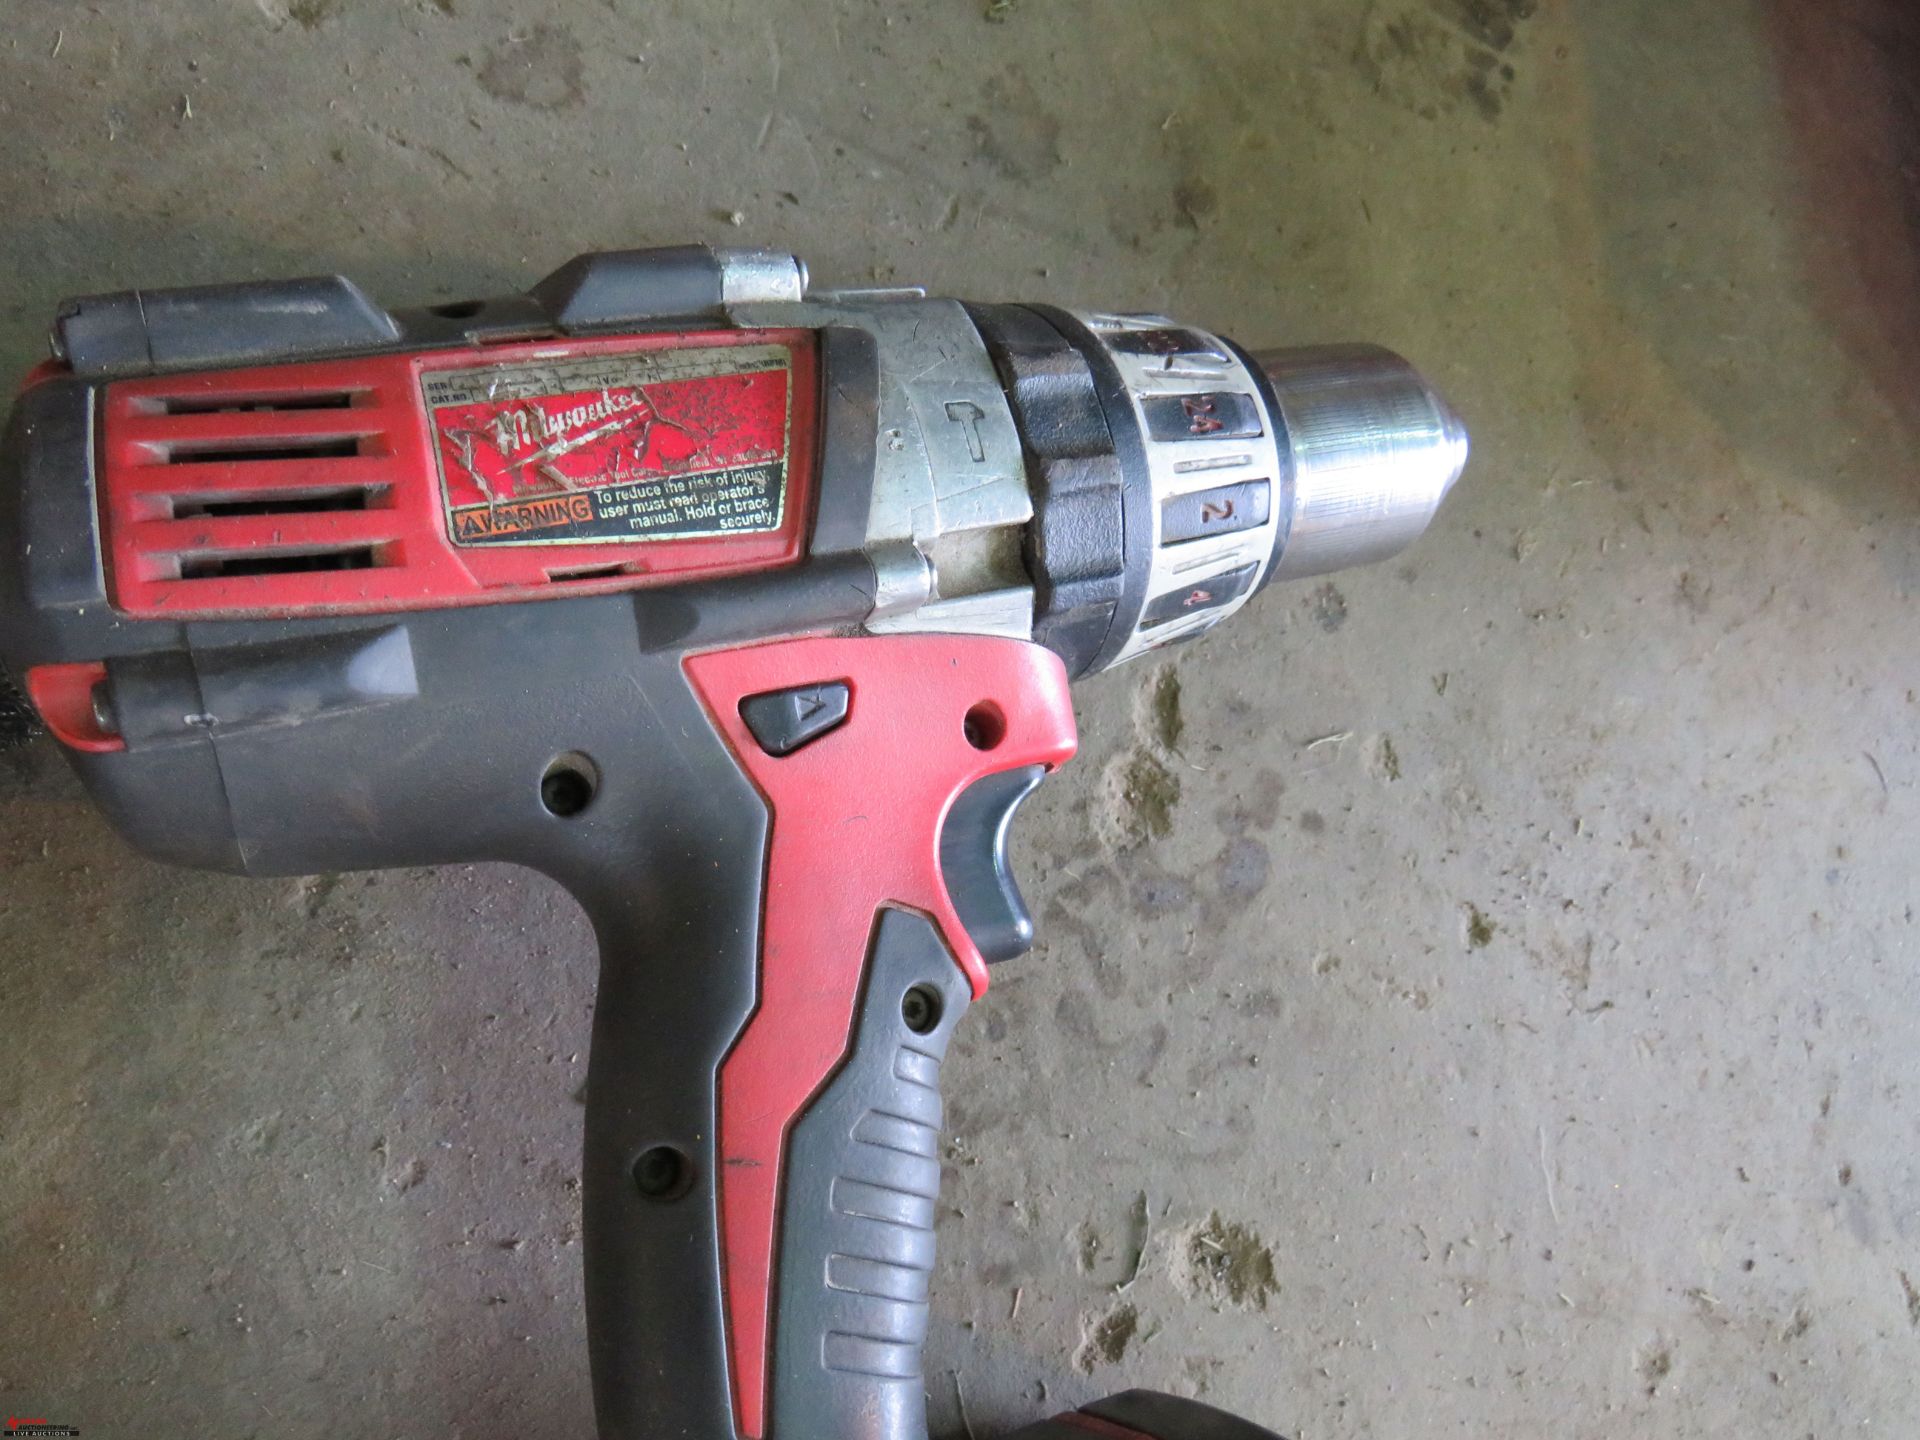 MILWAUKEE CORDLESS DRILLS (2), 18v, WITH CHARGER - Image 3 of 4